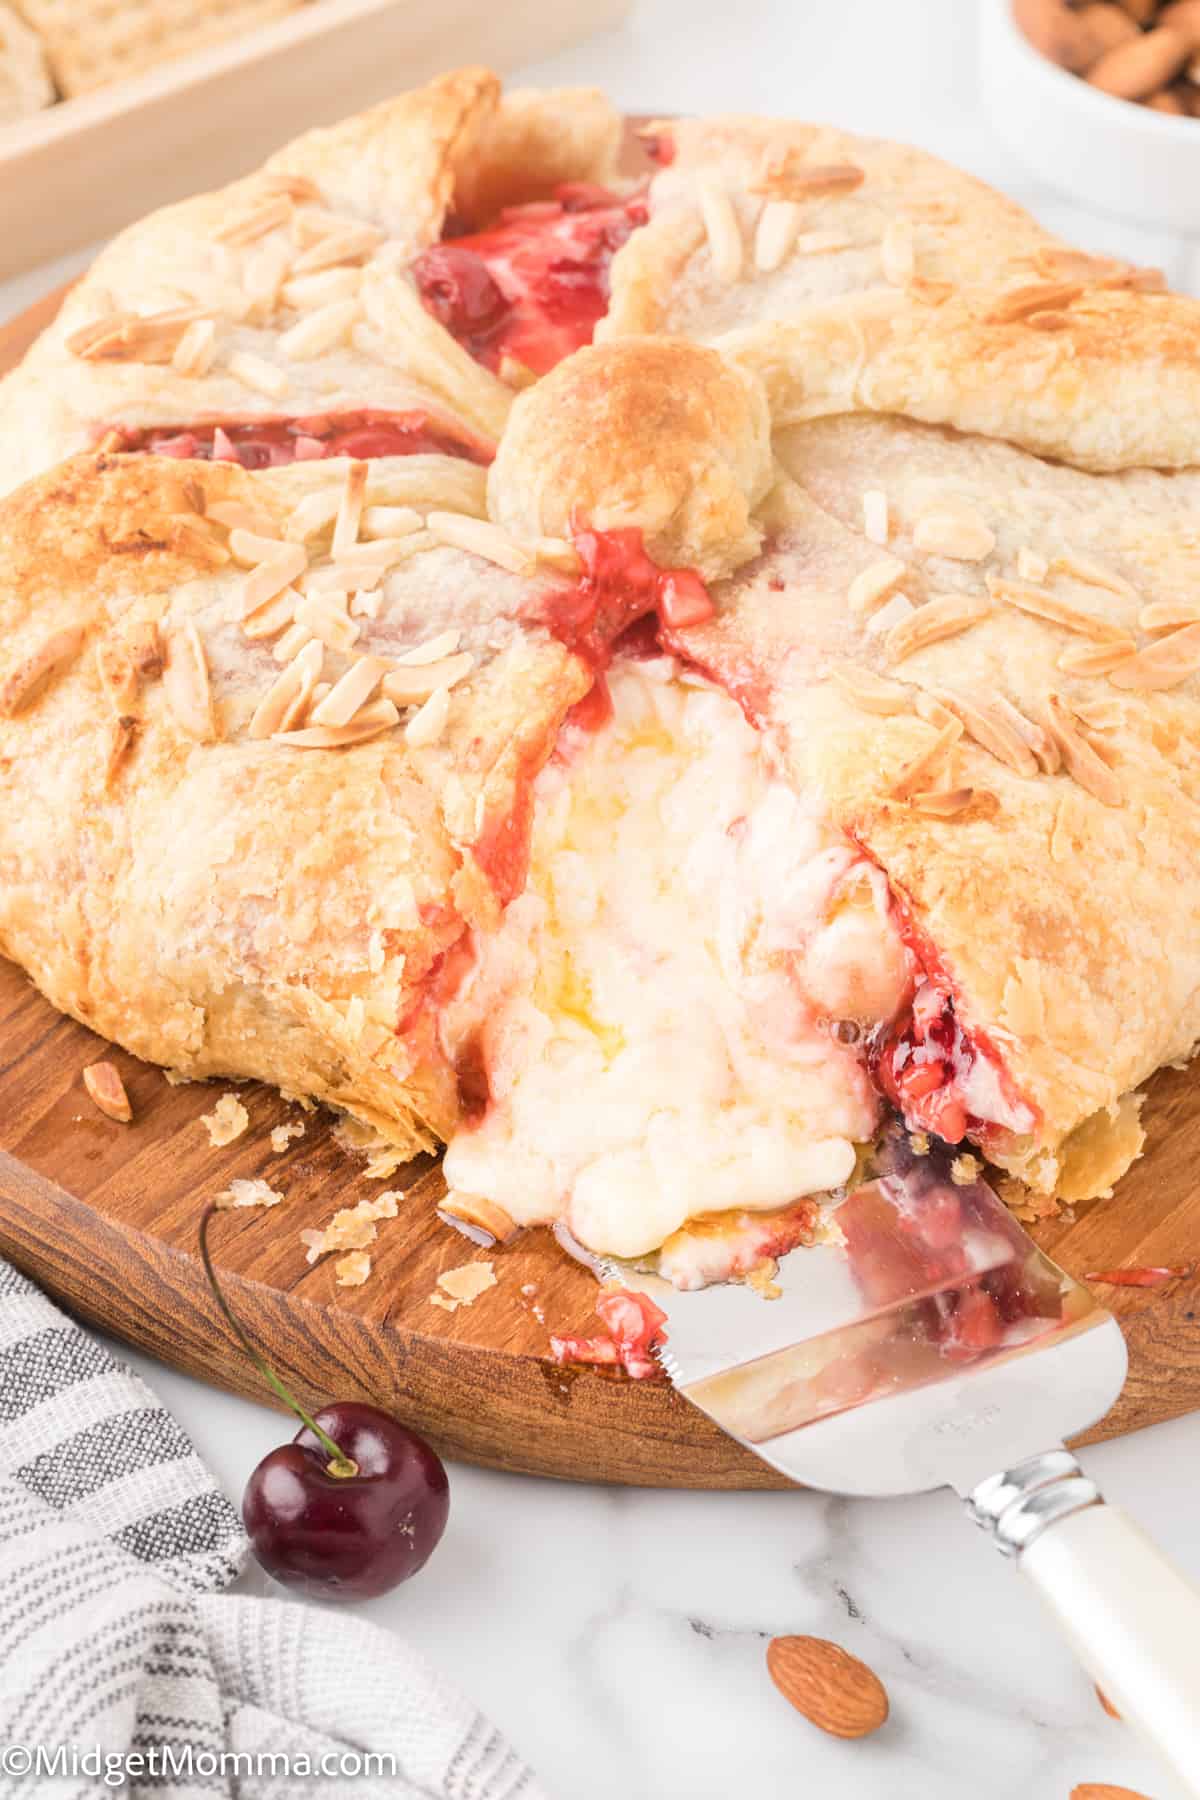 Cherry Baked Brie Recipe